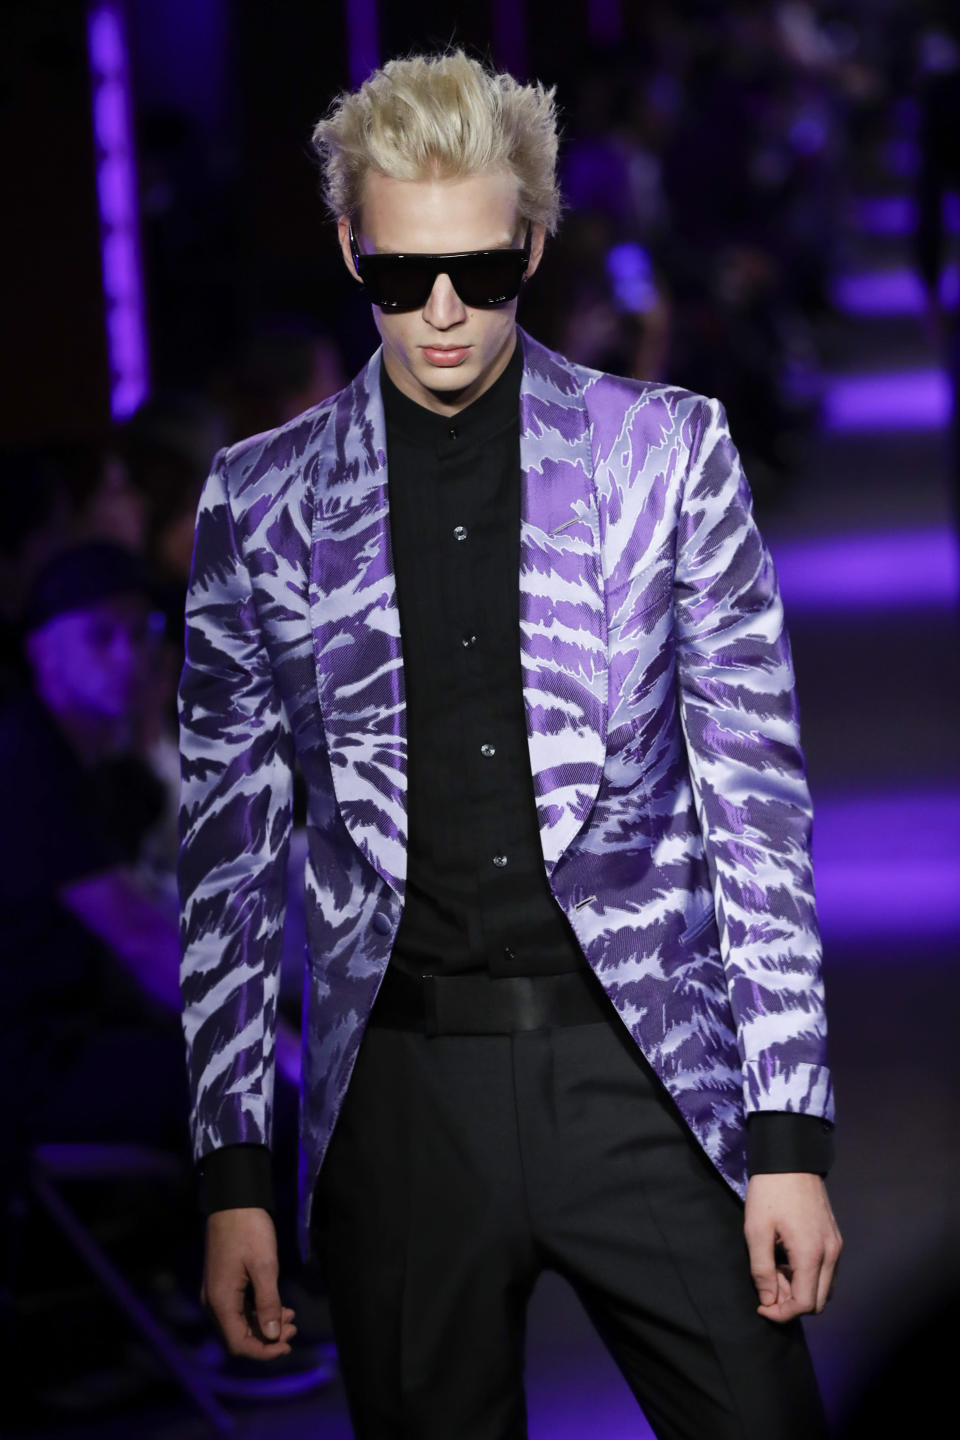 Fashion from the Tom Ford collection is modeled Monday, Sept. 9, 2019, in New York. (AP Photo/Frank Franklin II)